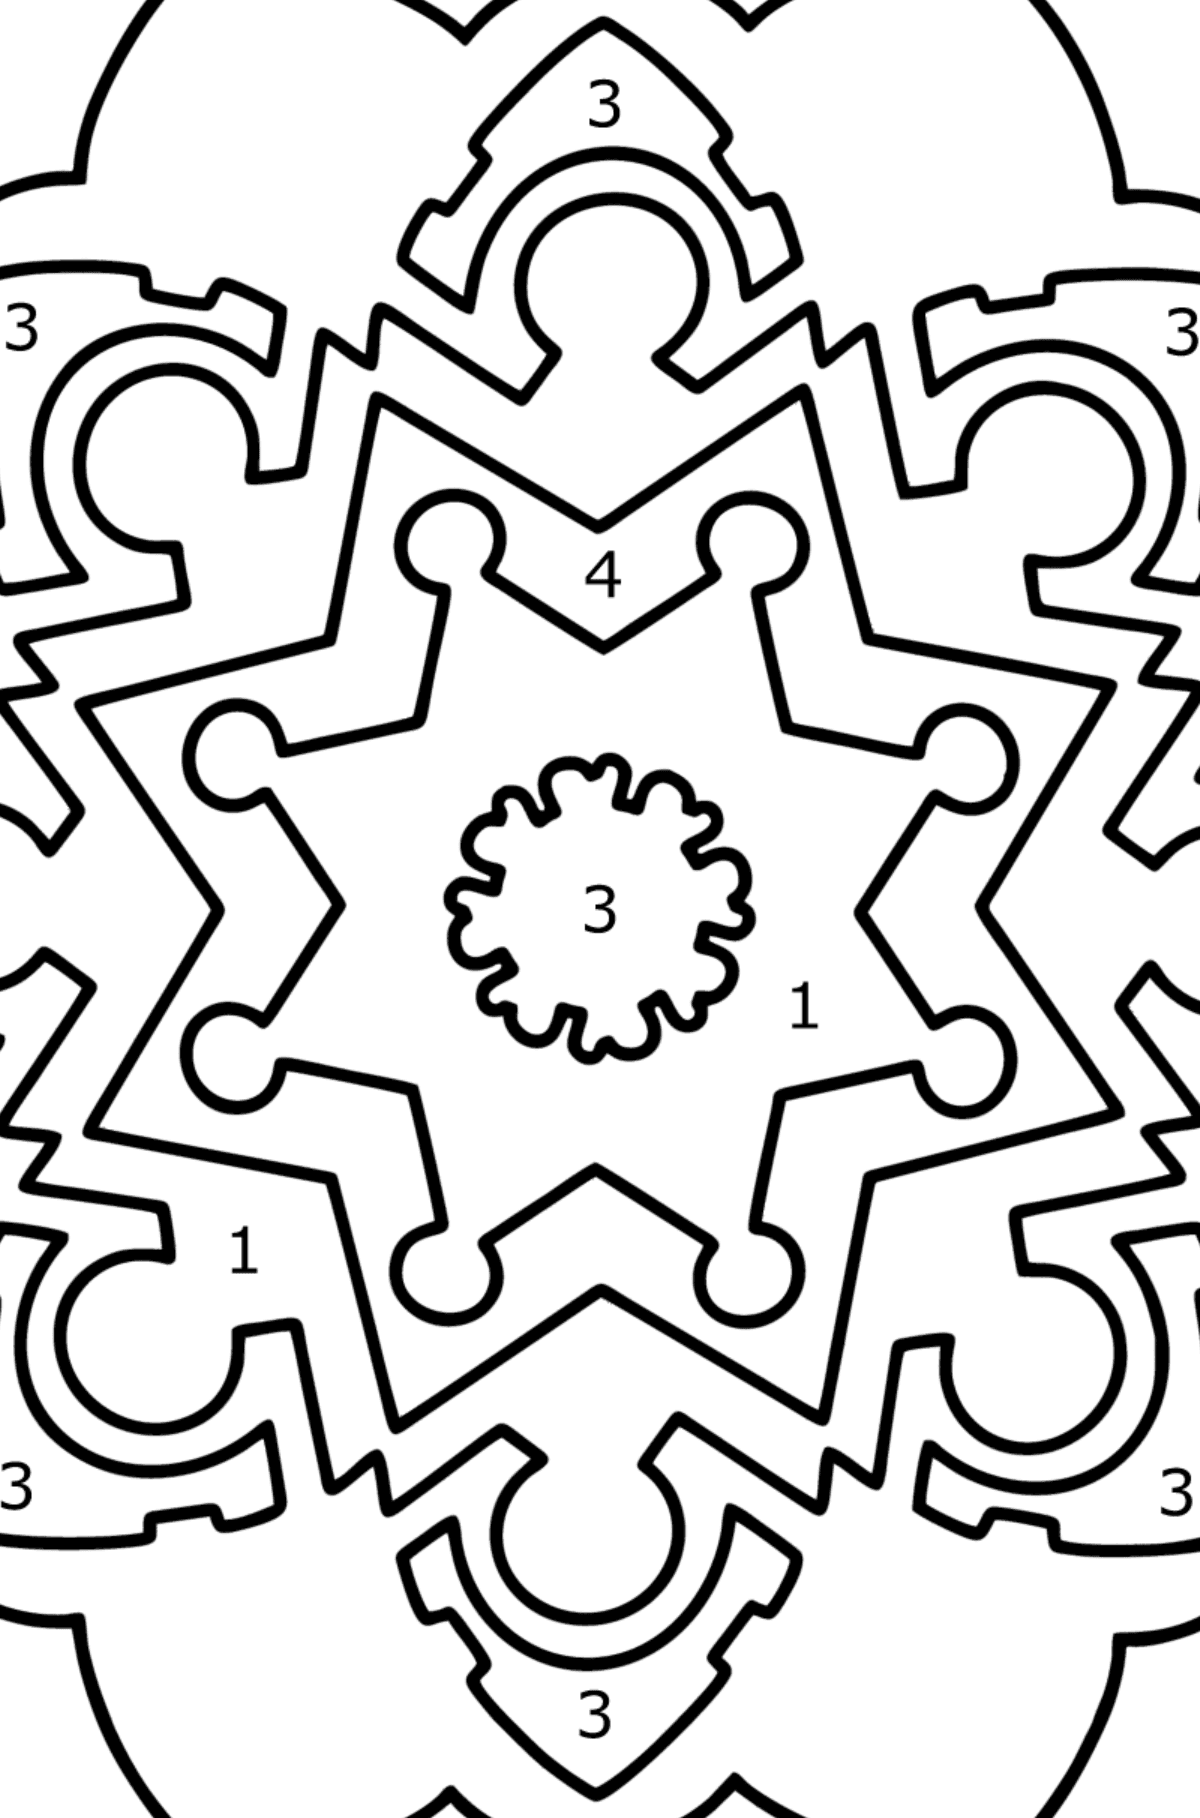 Mandala coloring page - 13 parts - Coloring by Numbers for Kids